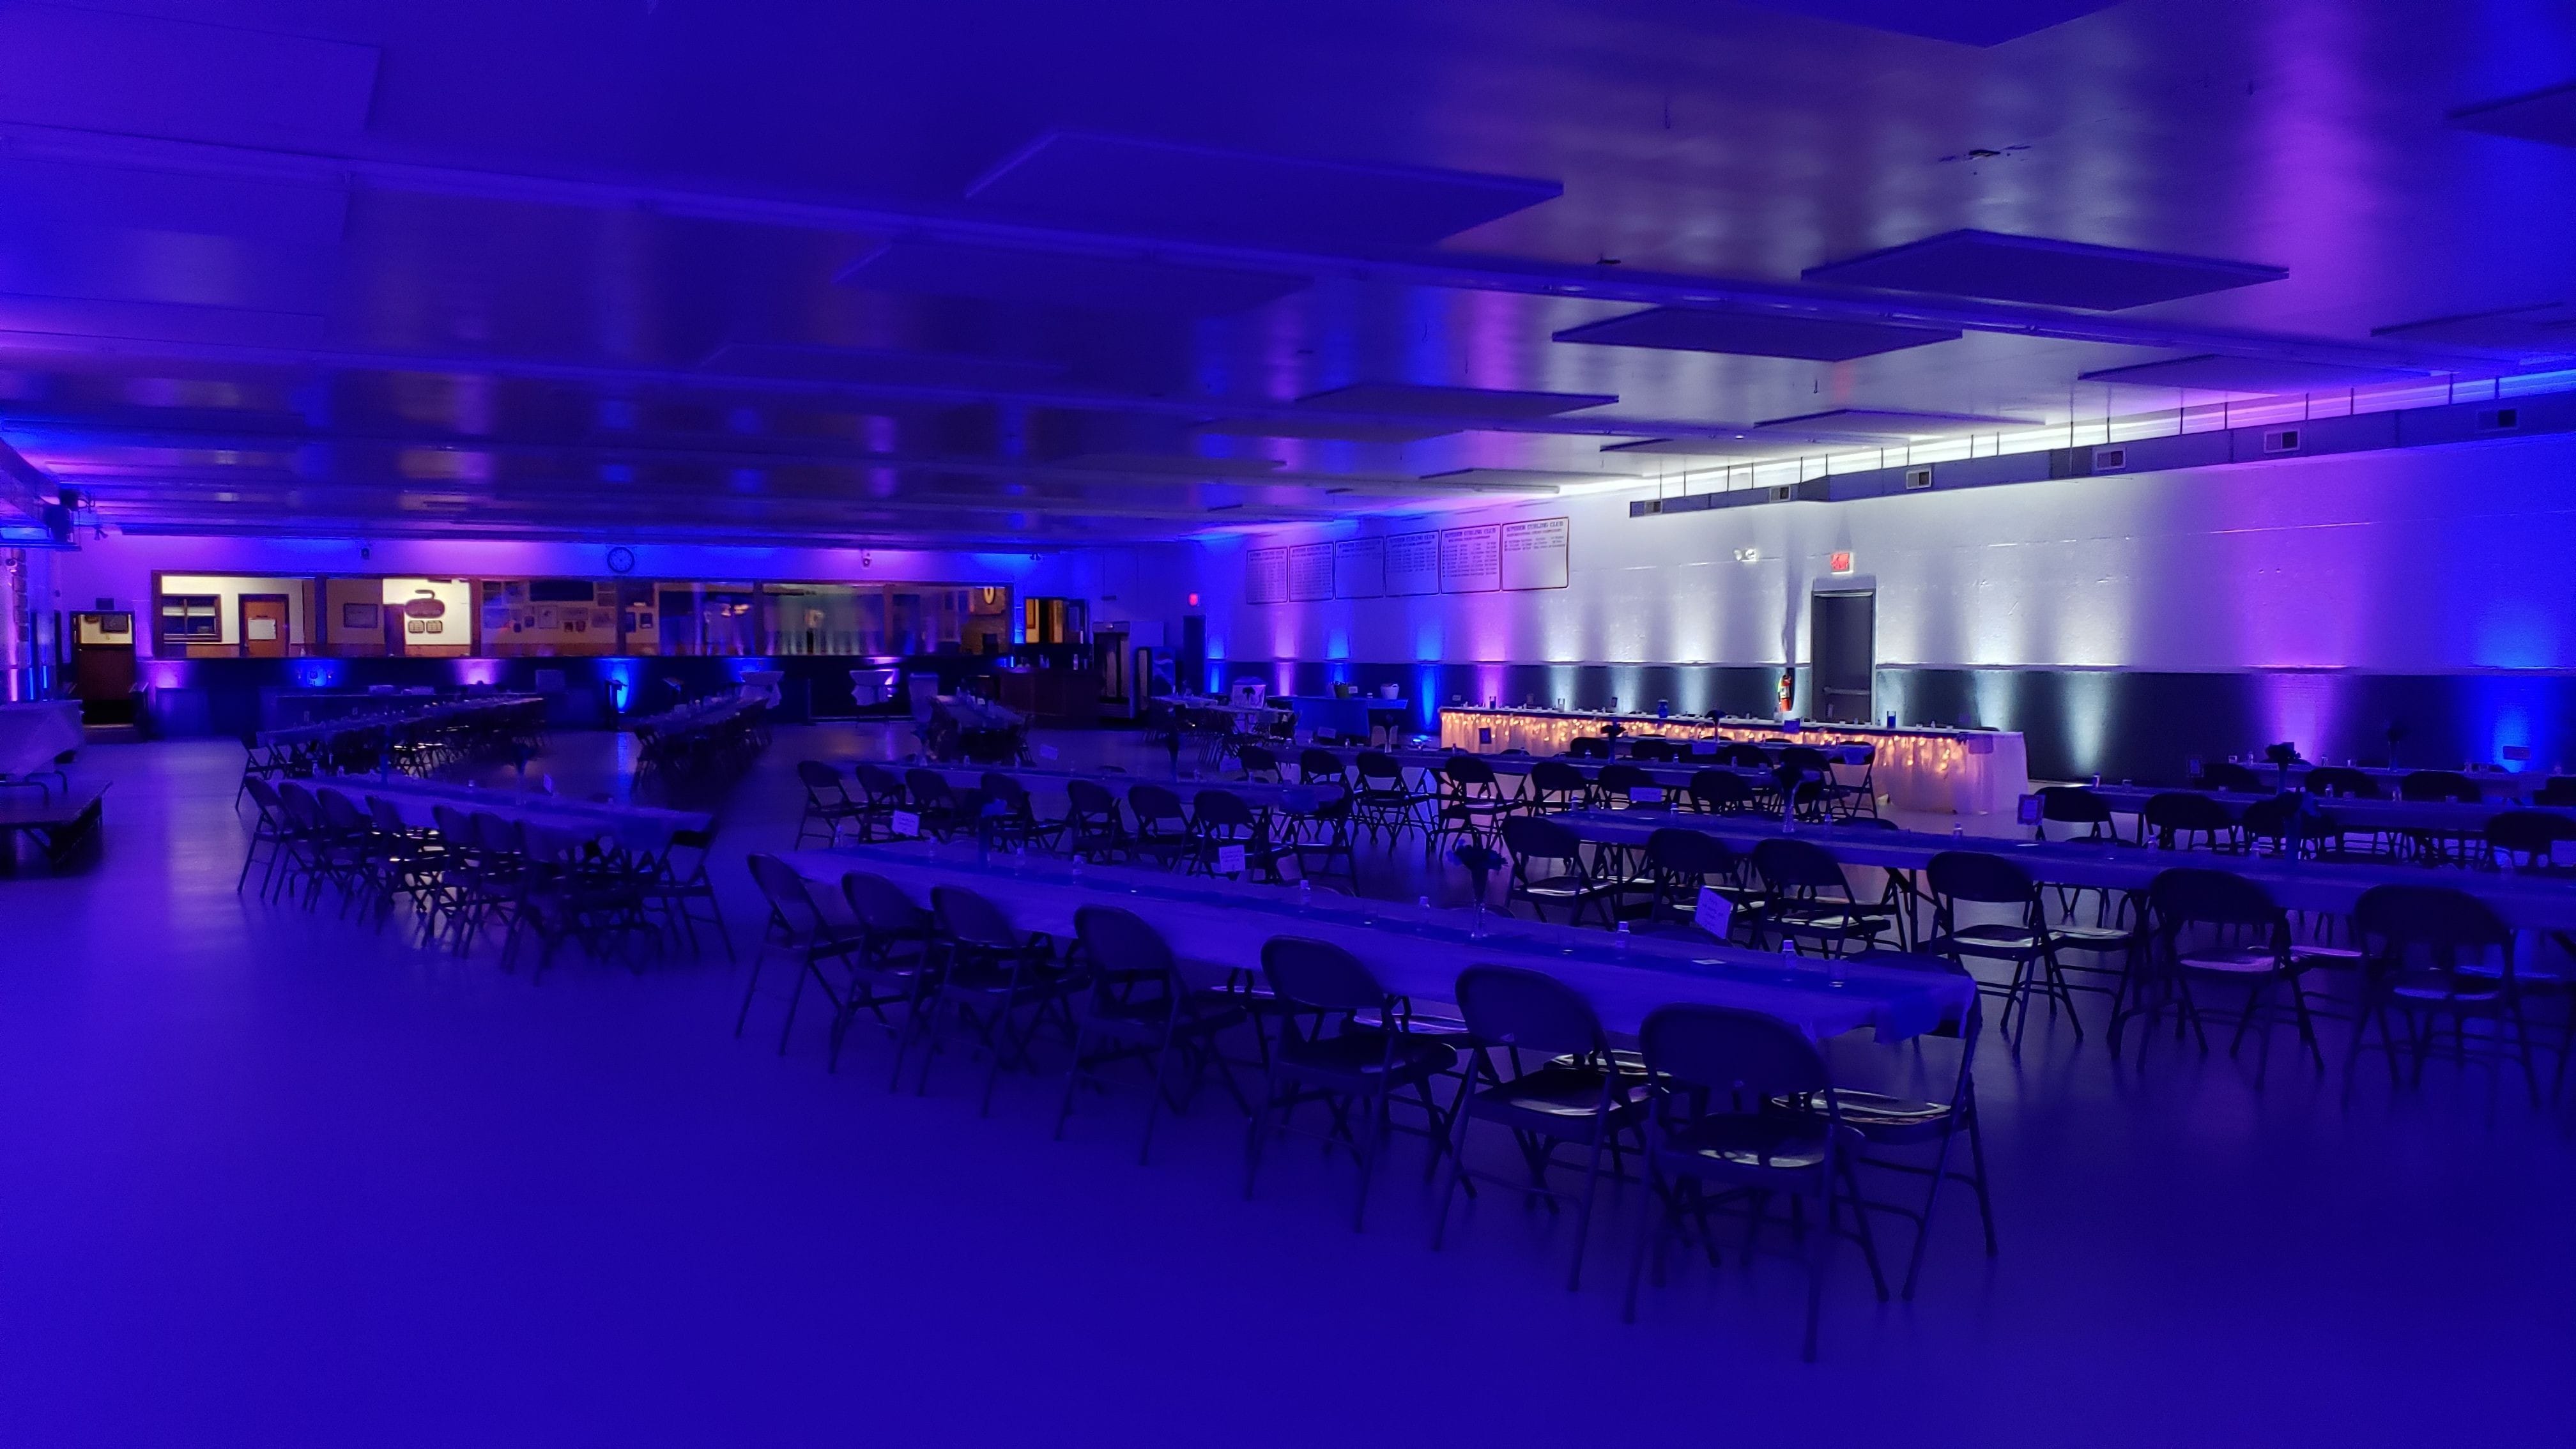 Superior Curling Club.
Up lighting in blue and lavender, with white behind the head table.